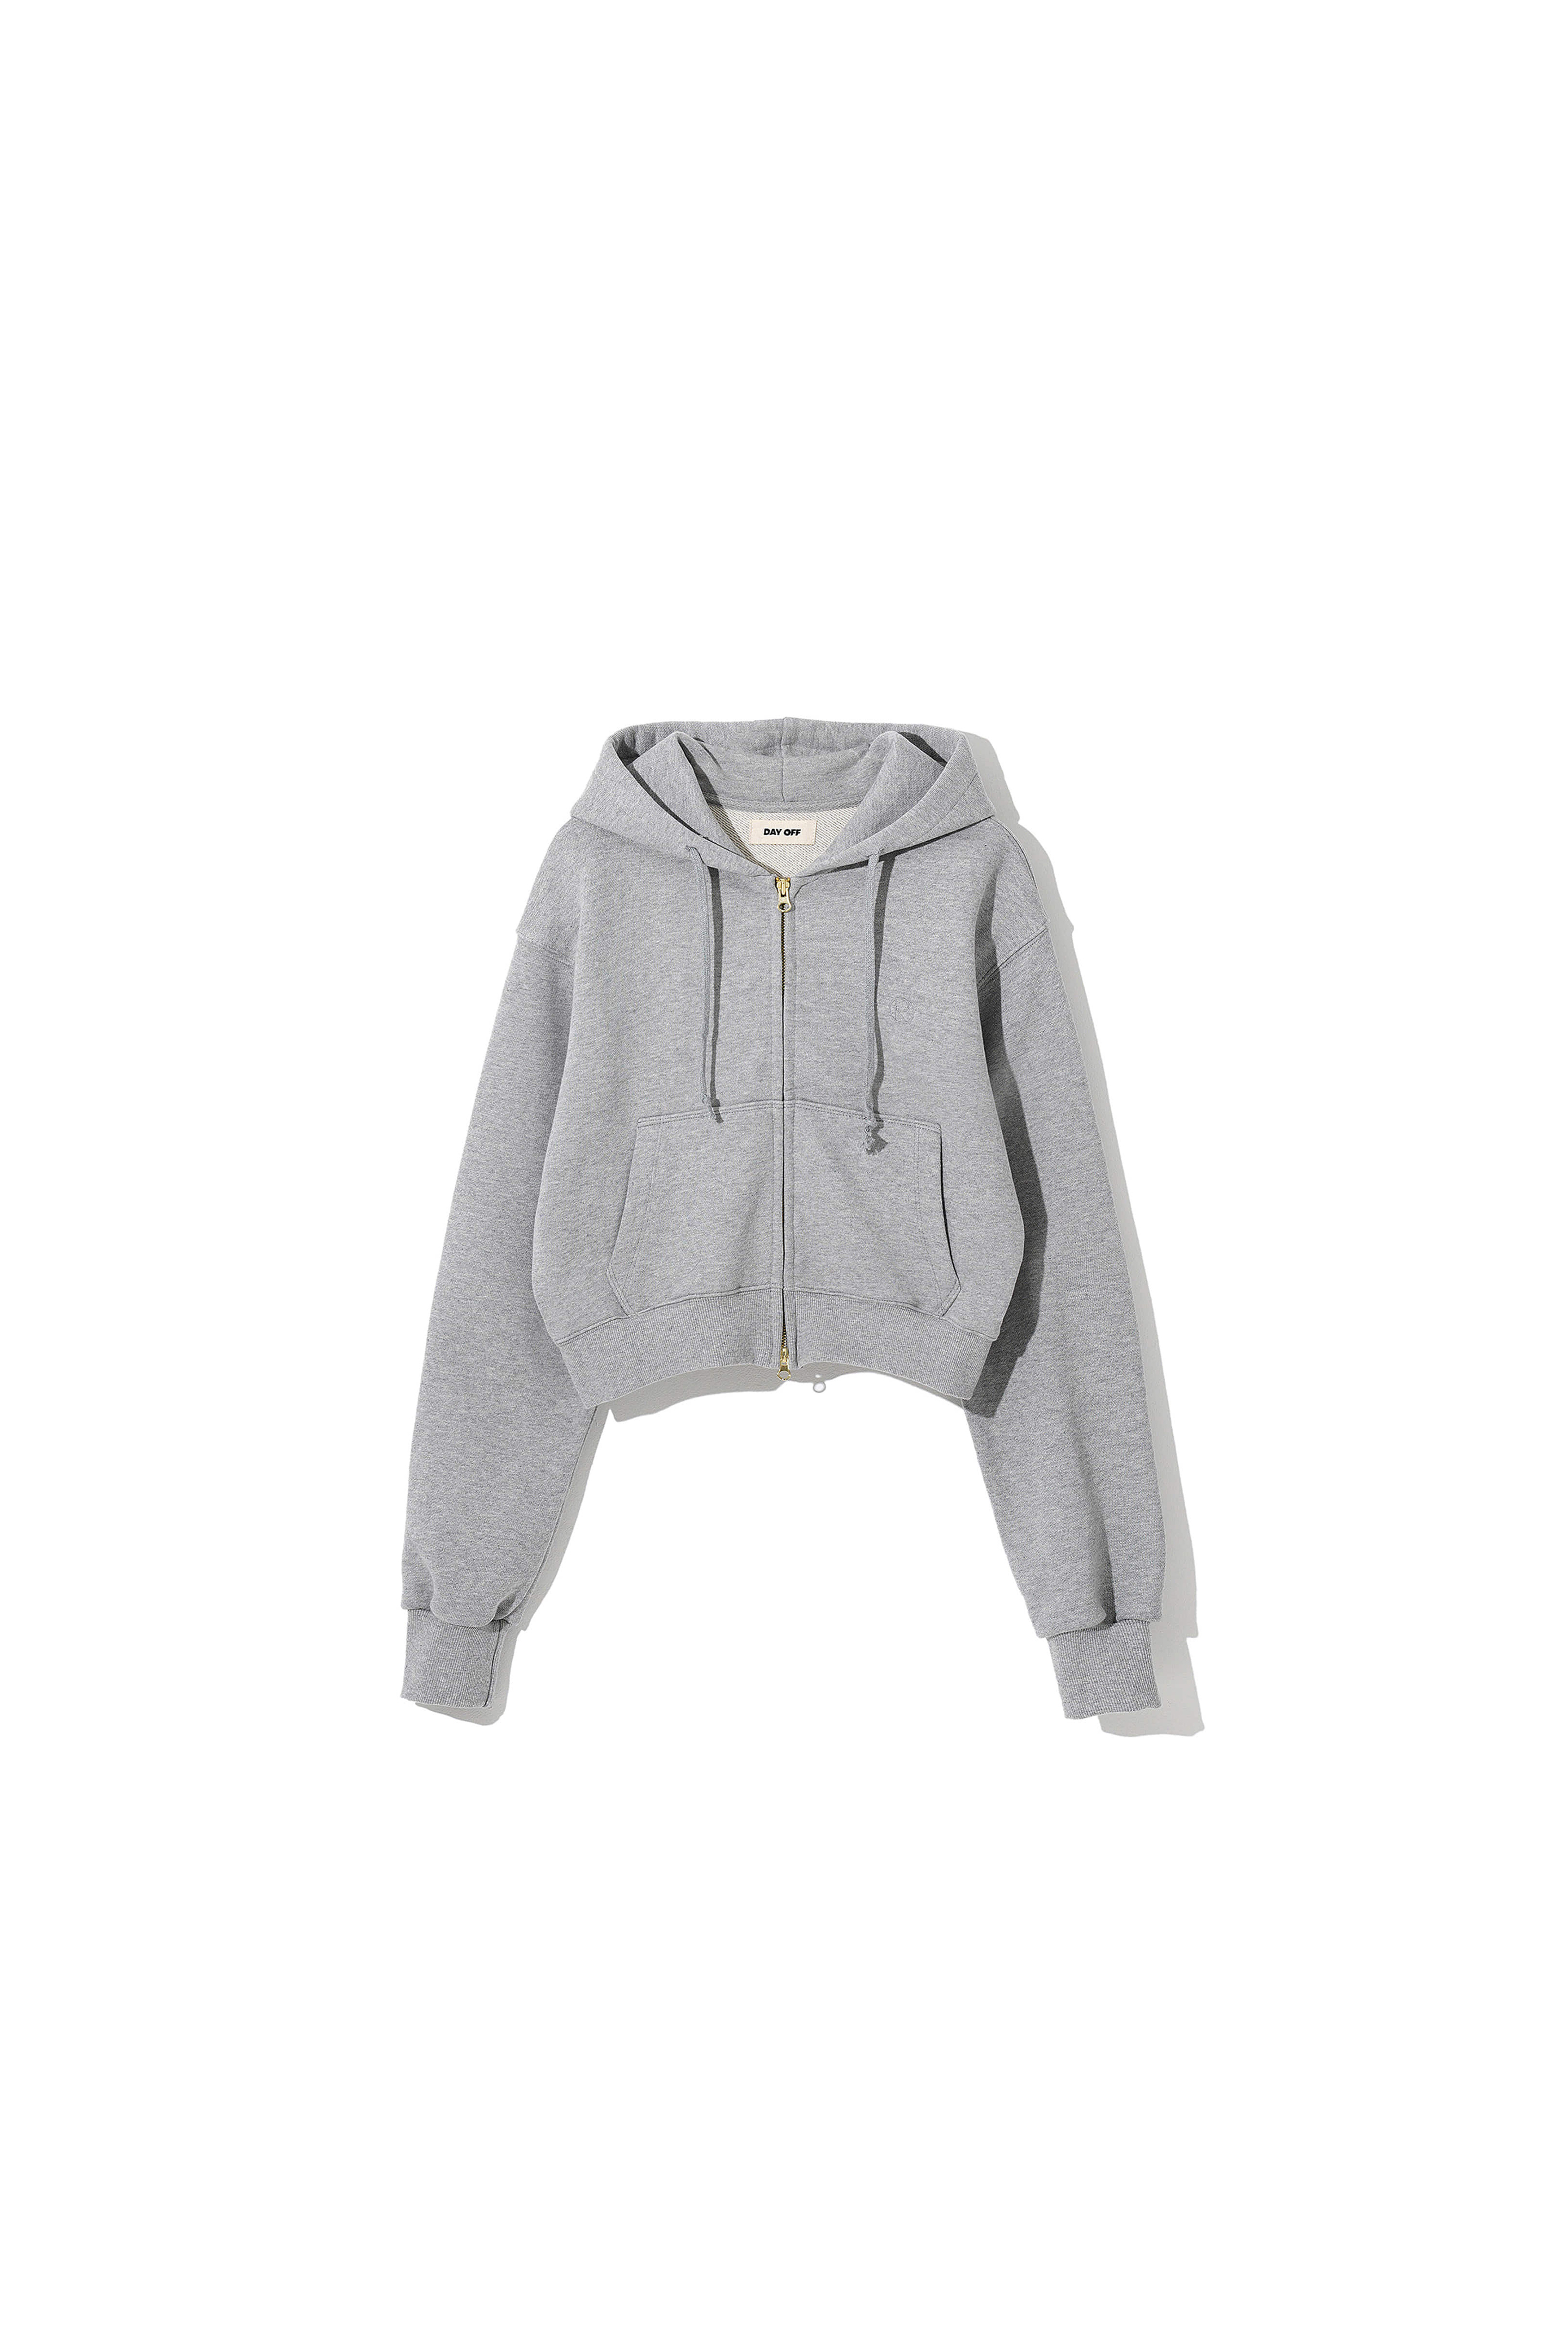 DAY-OFF 005 Cropped Hoodie Jumper  M.Grey